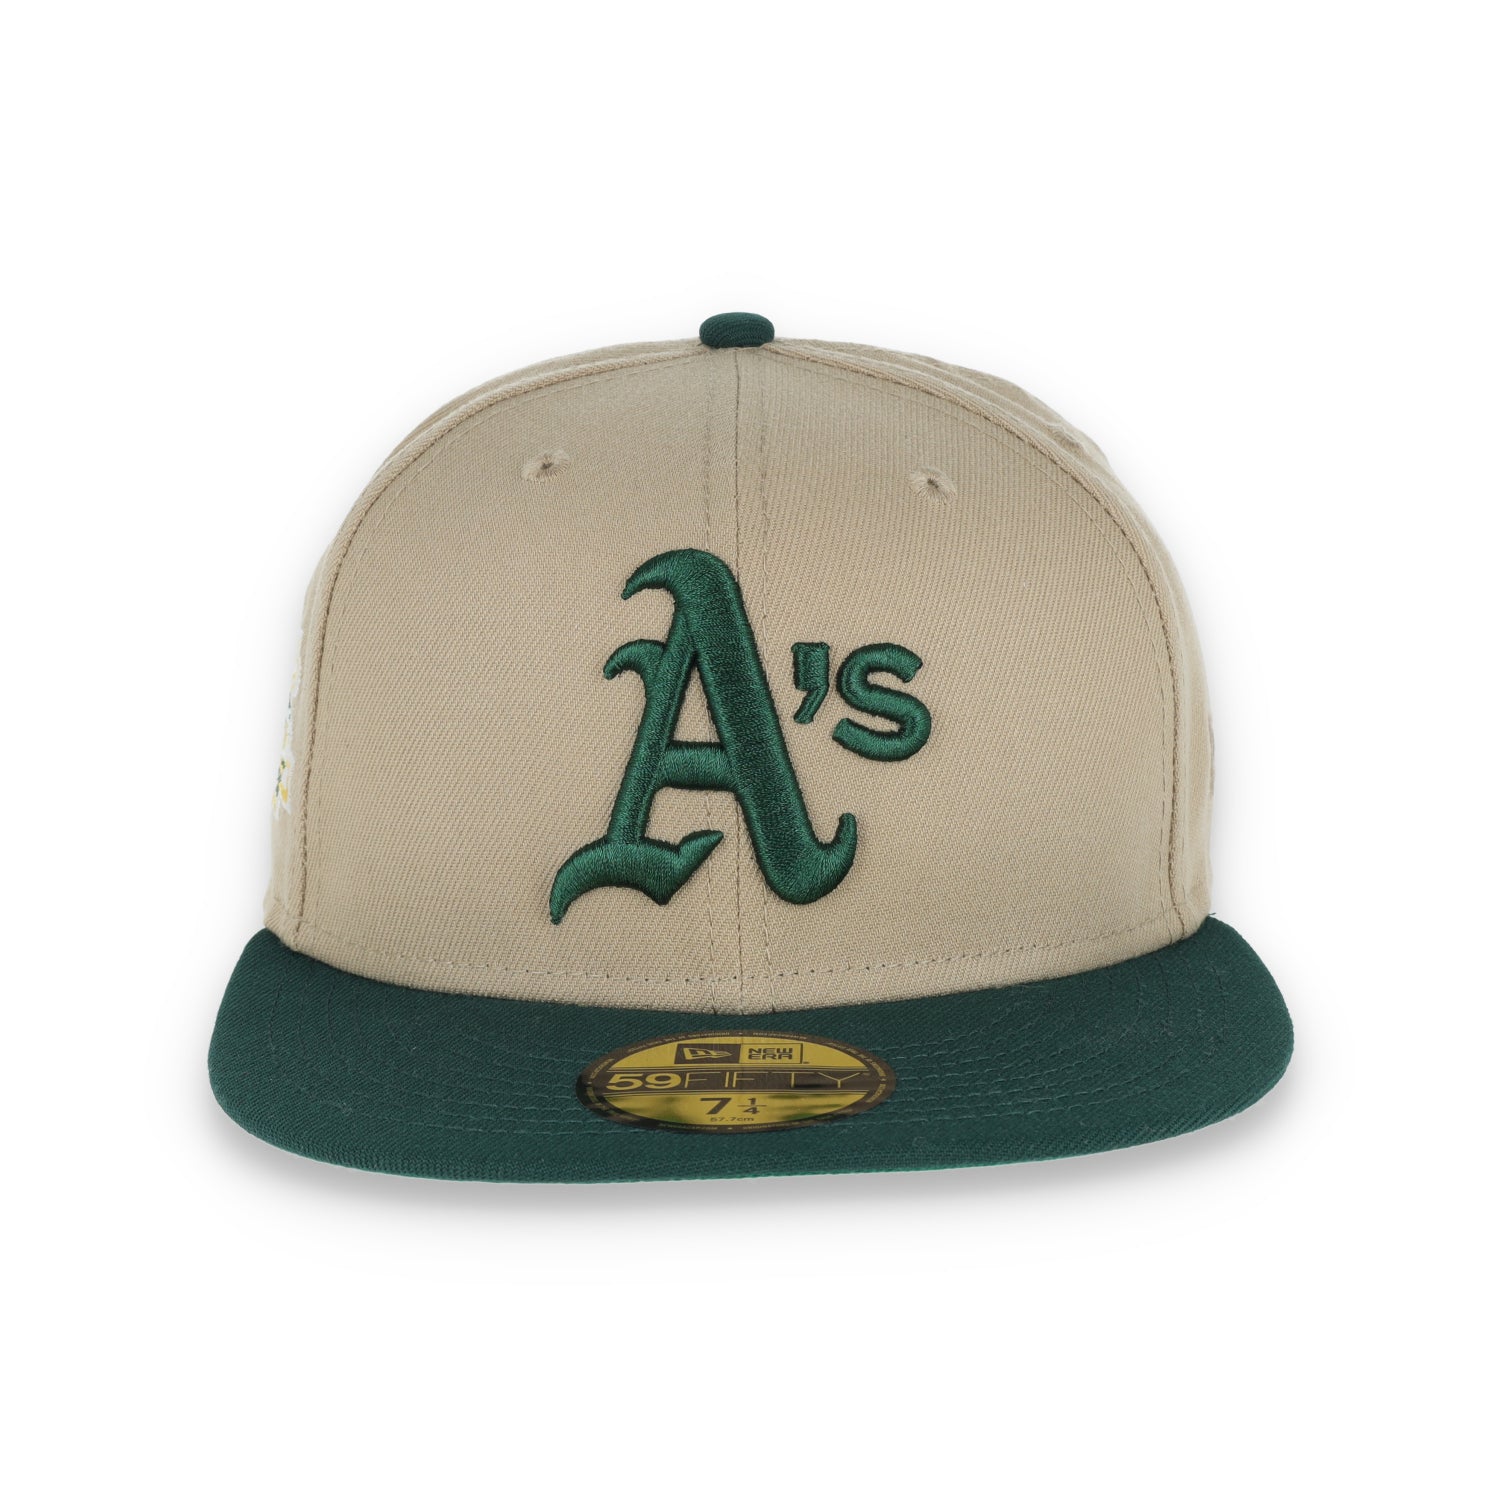 New Era Oakland Athletics 1989 Battle Of The Bay Side Patch 59Fifty Fitted Khaki Hat